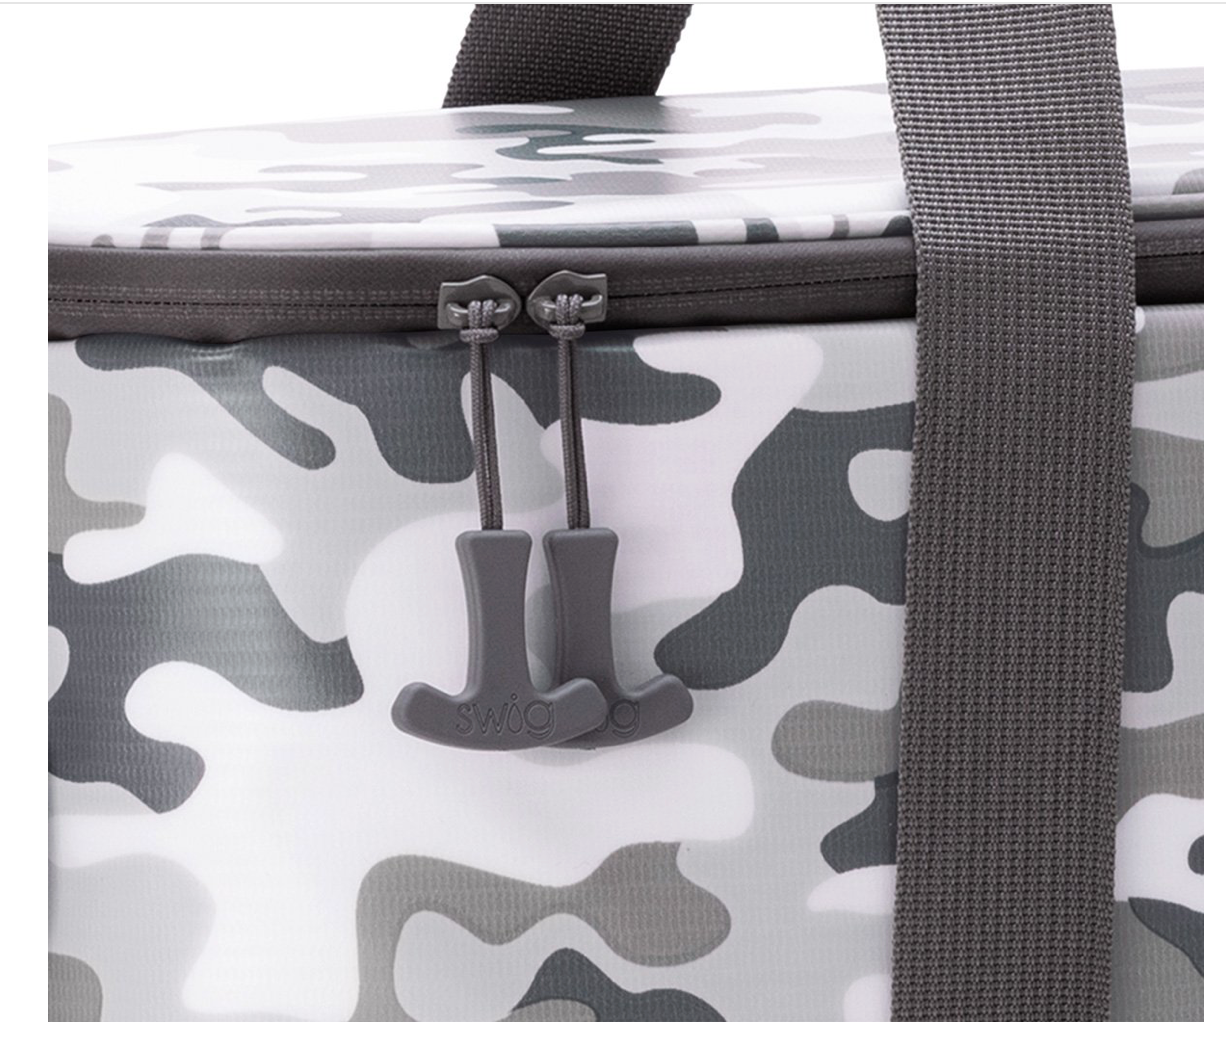 Swig Incognito Camo Packi Backpack Cooler – Pazzazed